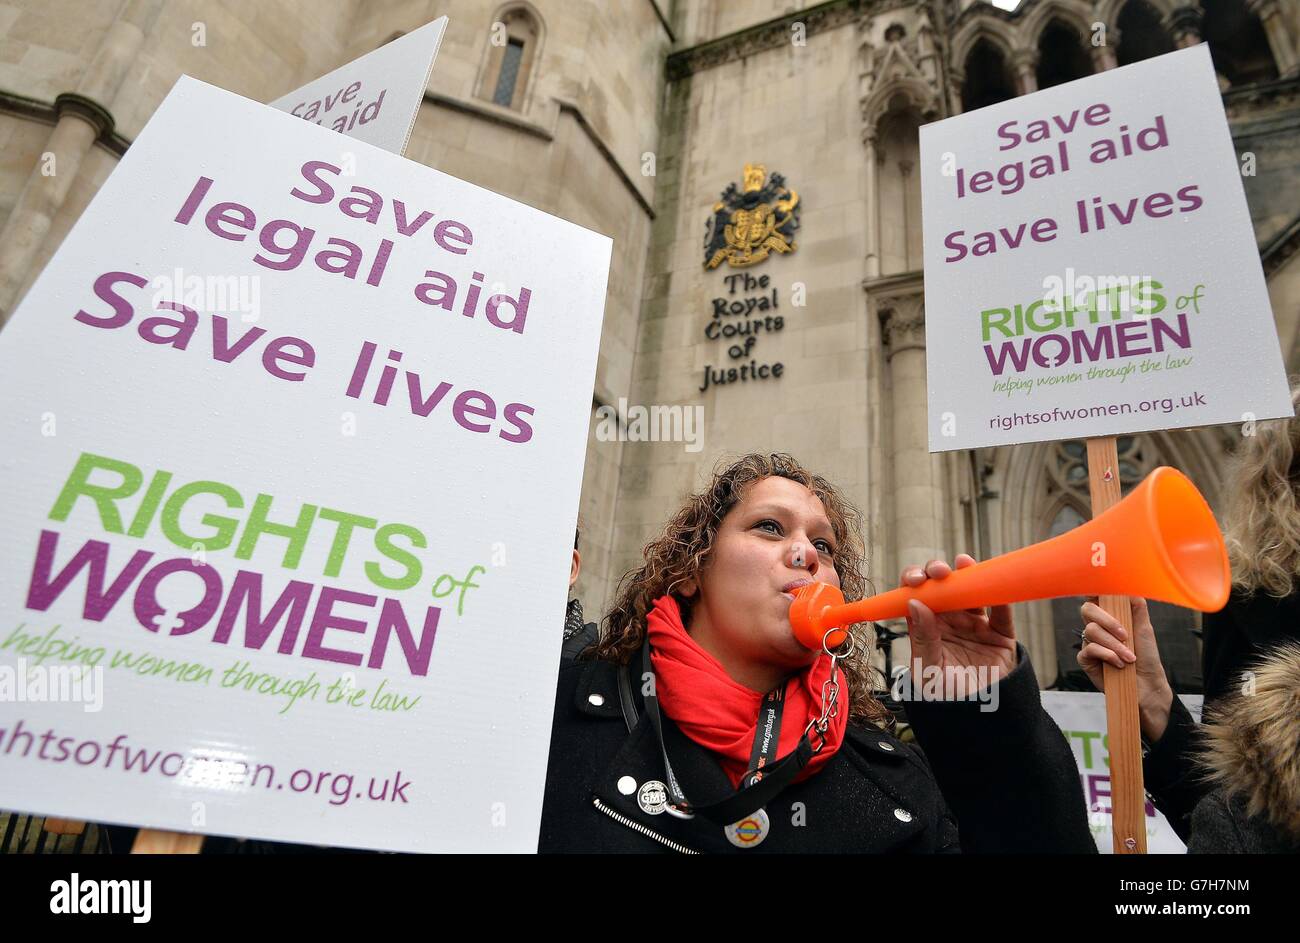 Members of Rights Of Women protest outside the High Court, London, as the group mounts a challenge over changes introduced by the Government in April 2013 which require victims to provide a prescribed form of evidence in order to apply for family law legal aid. Stock Photo